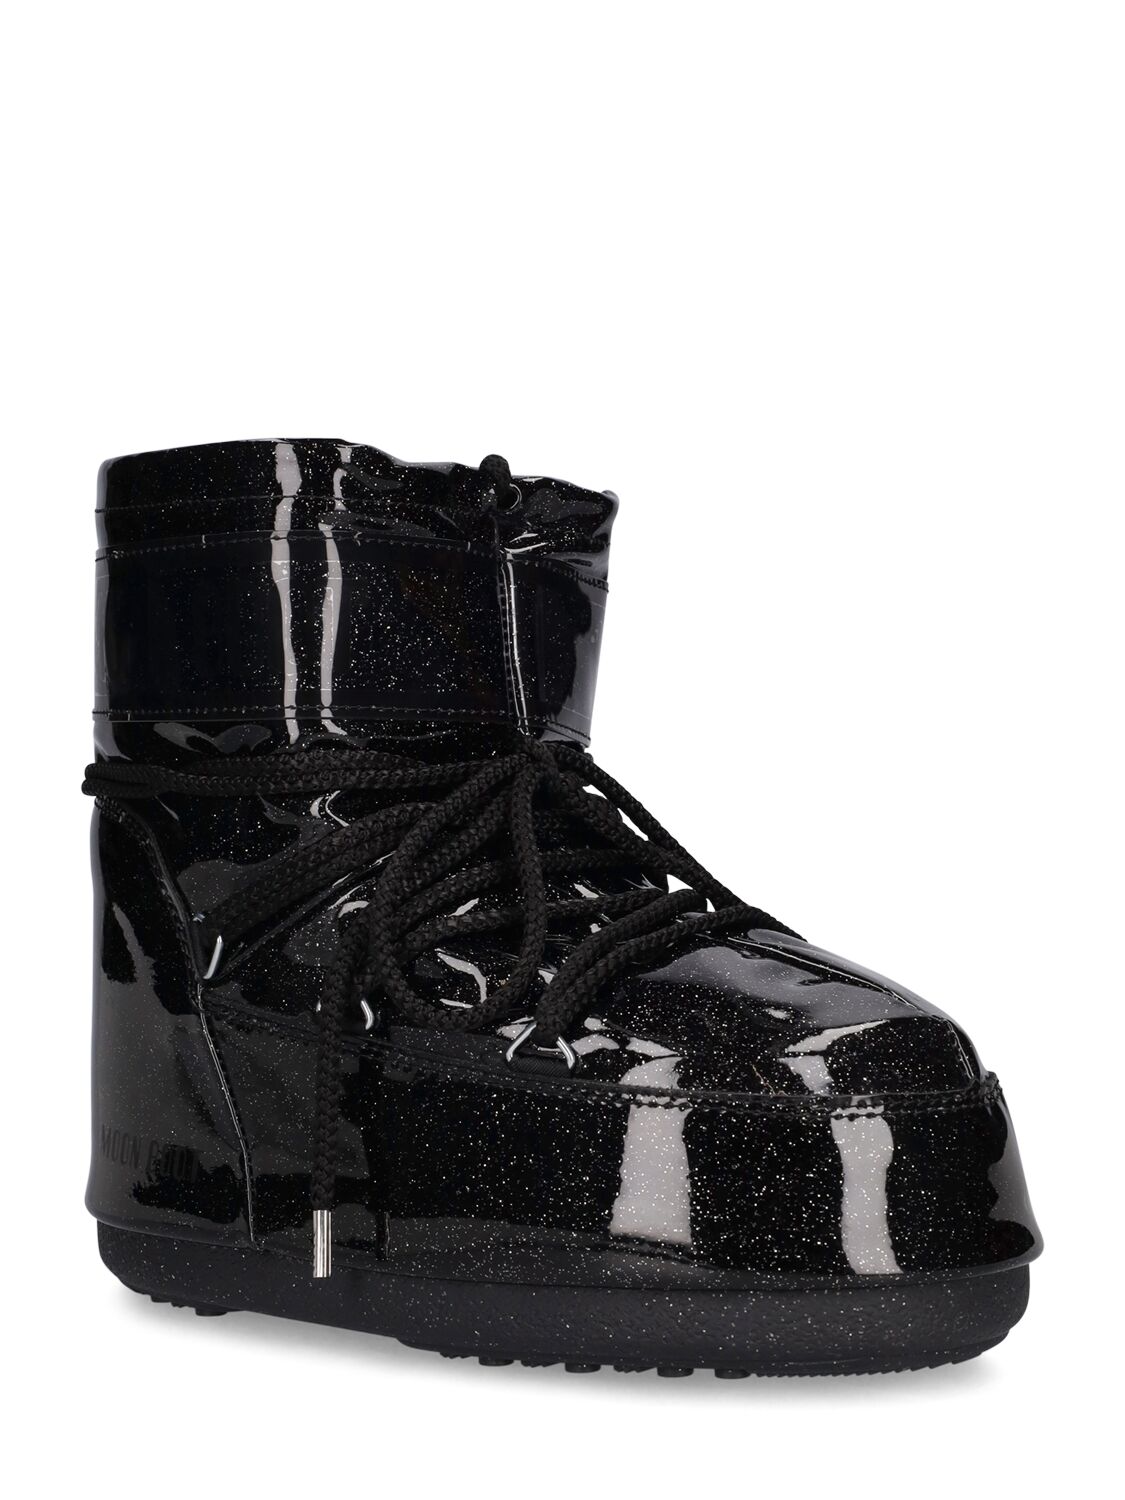 ICON LOW BLACK GLITTER BOOTS